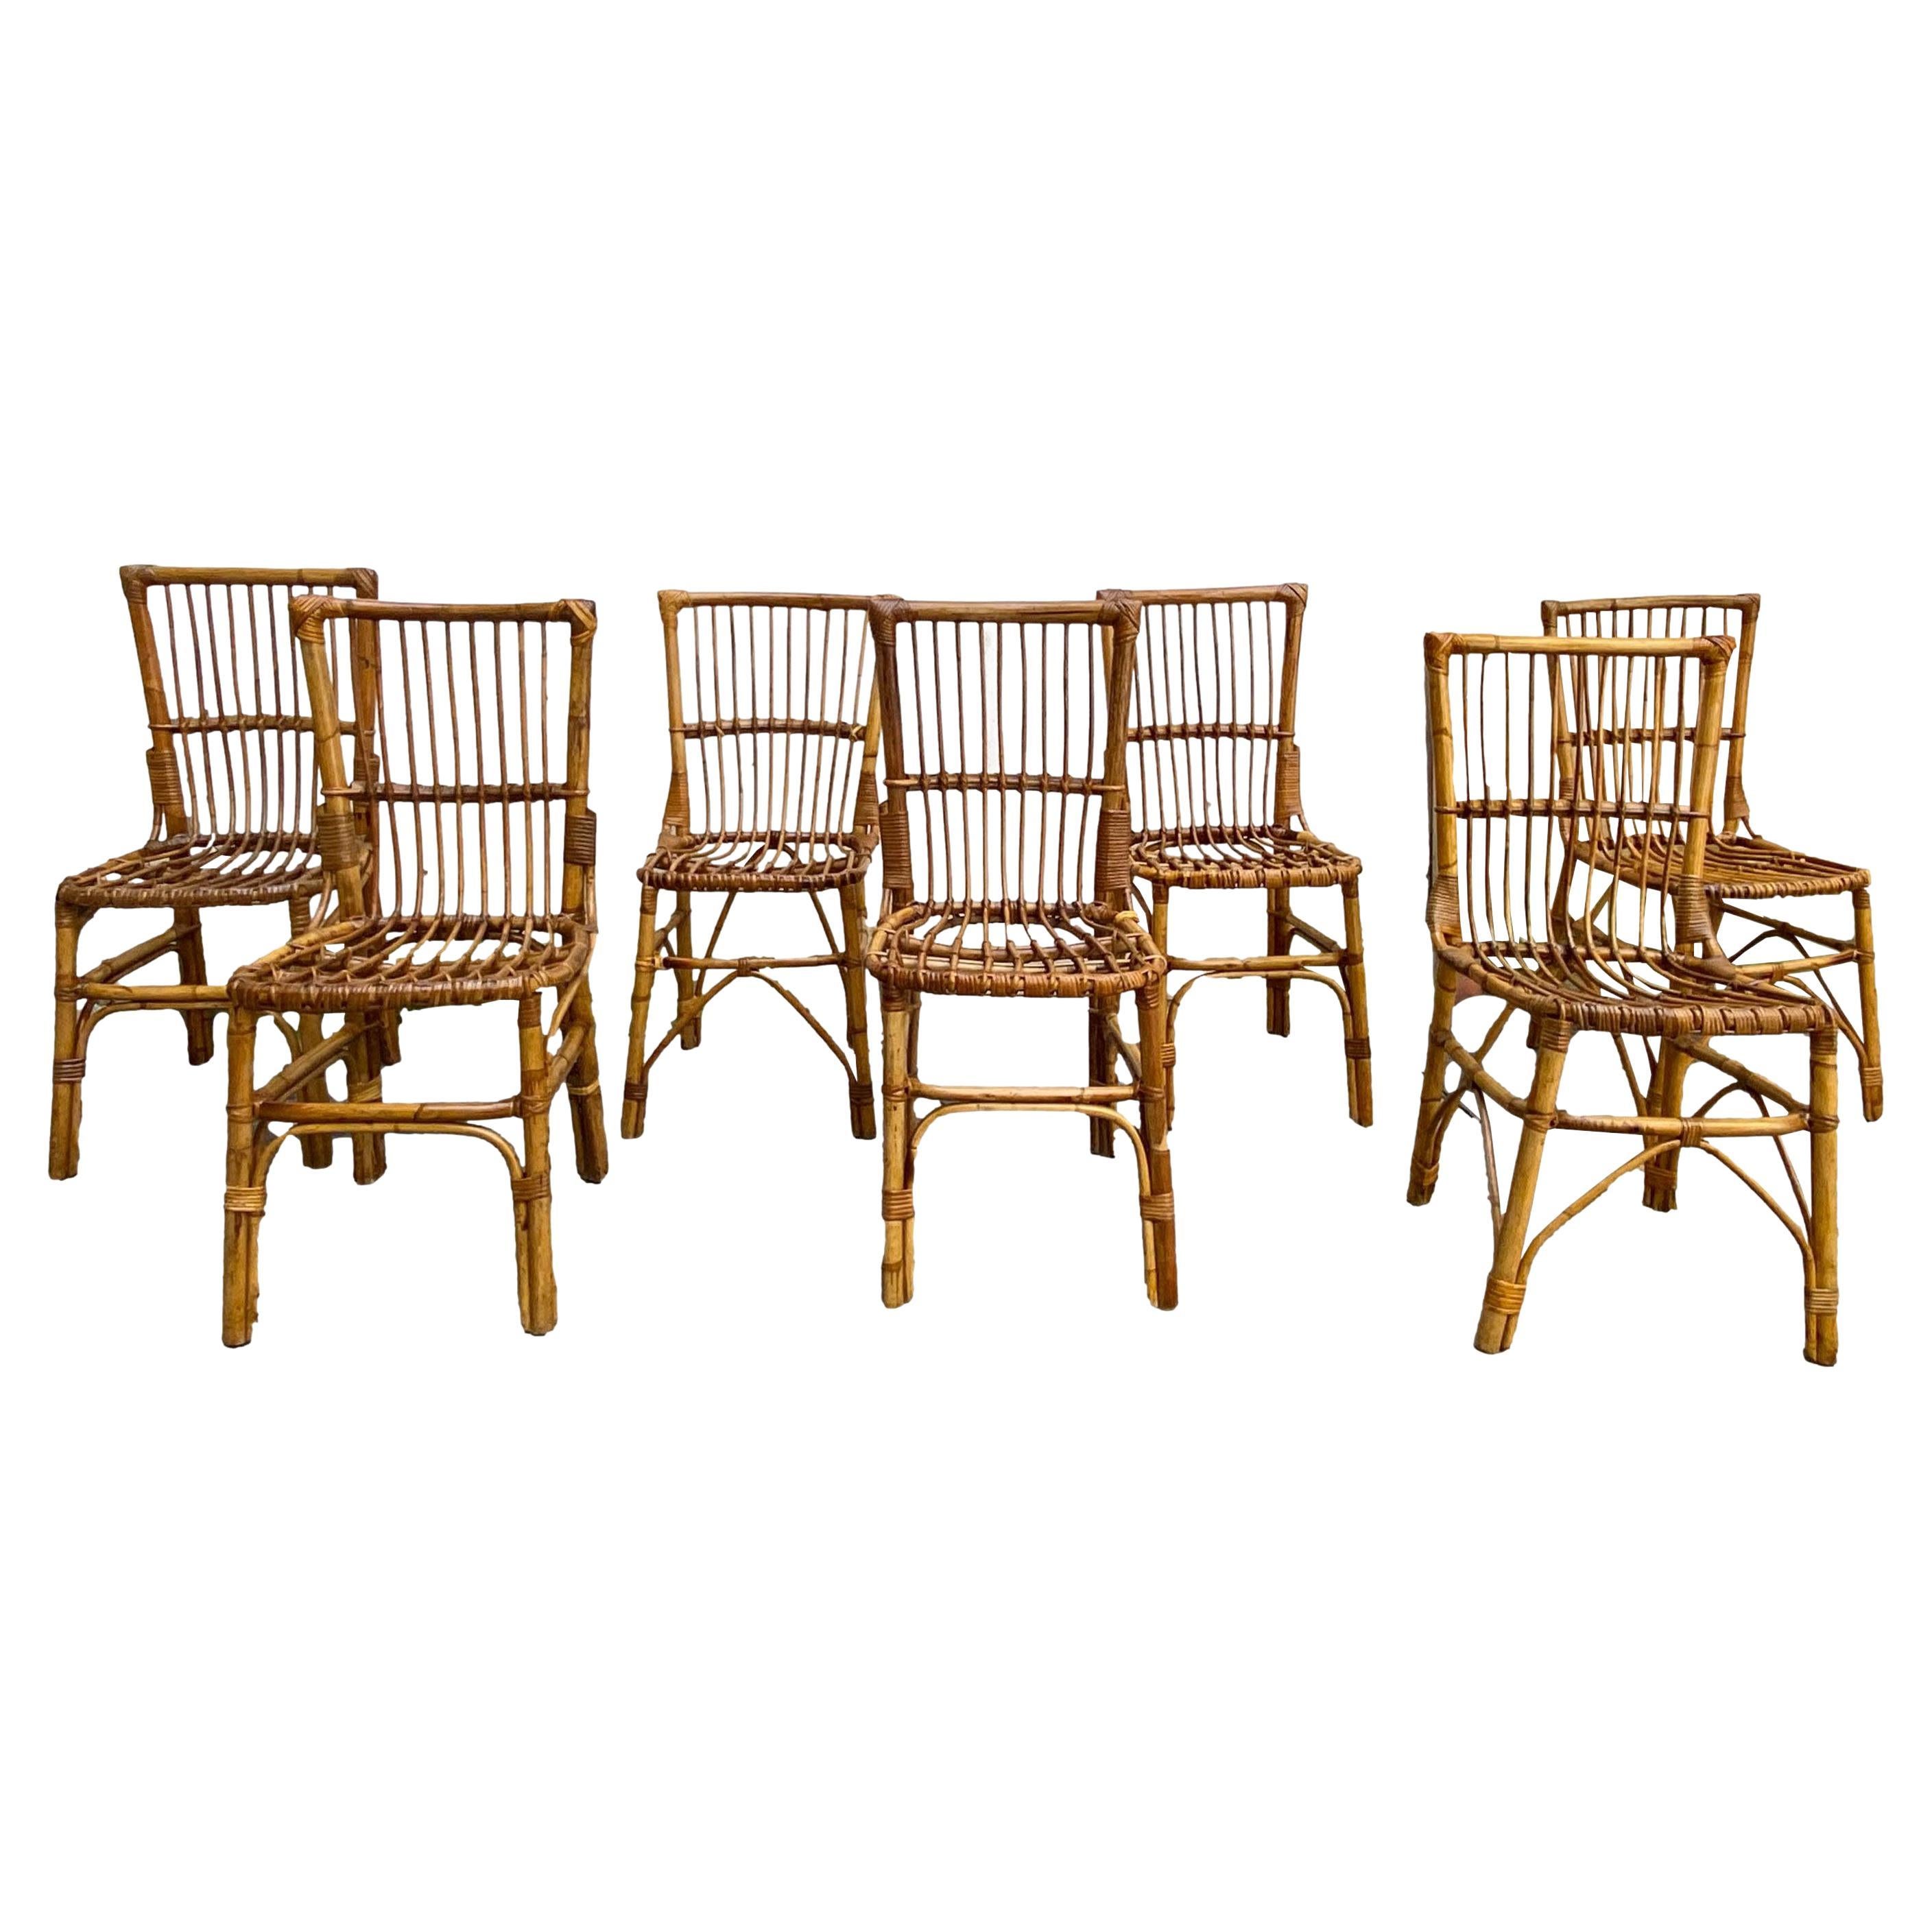 Dal Vera Set of 7 Bamboo and Rattan Dining Chairs, Italy 1960s